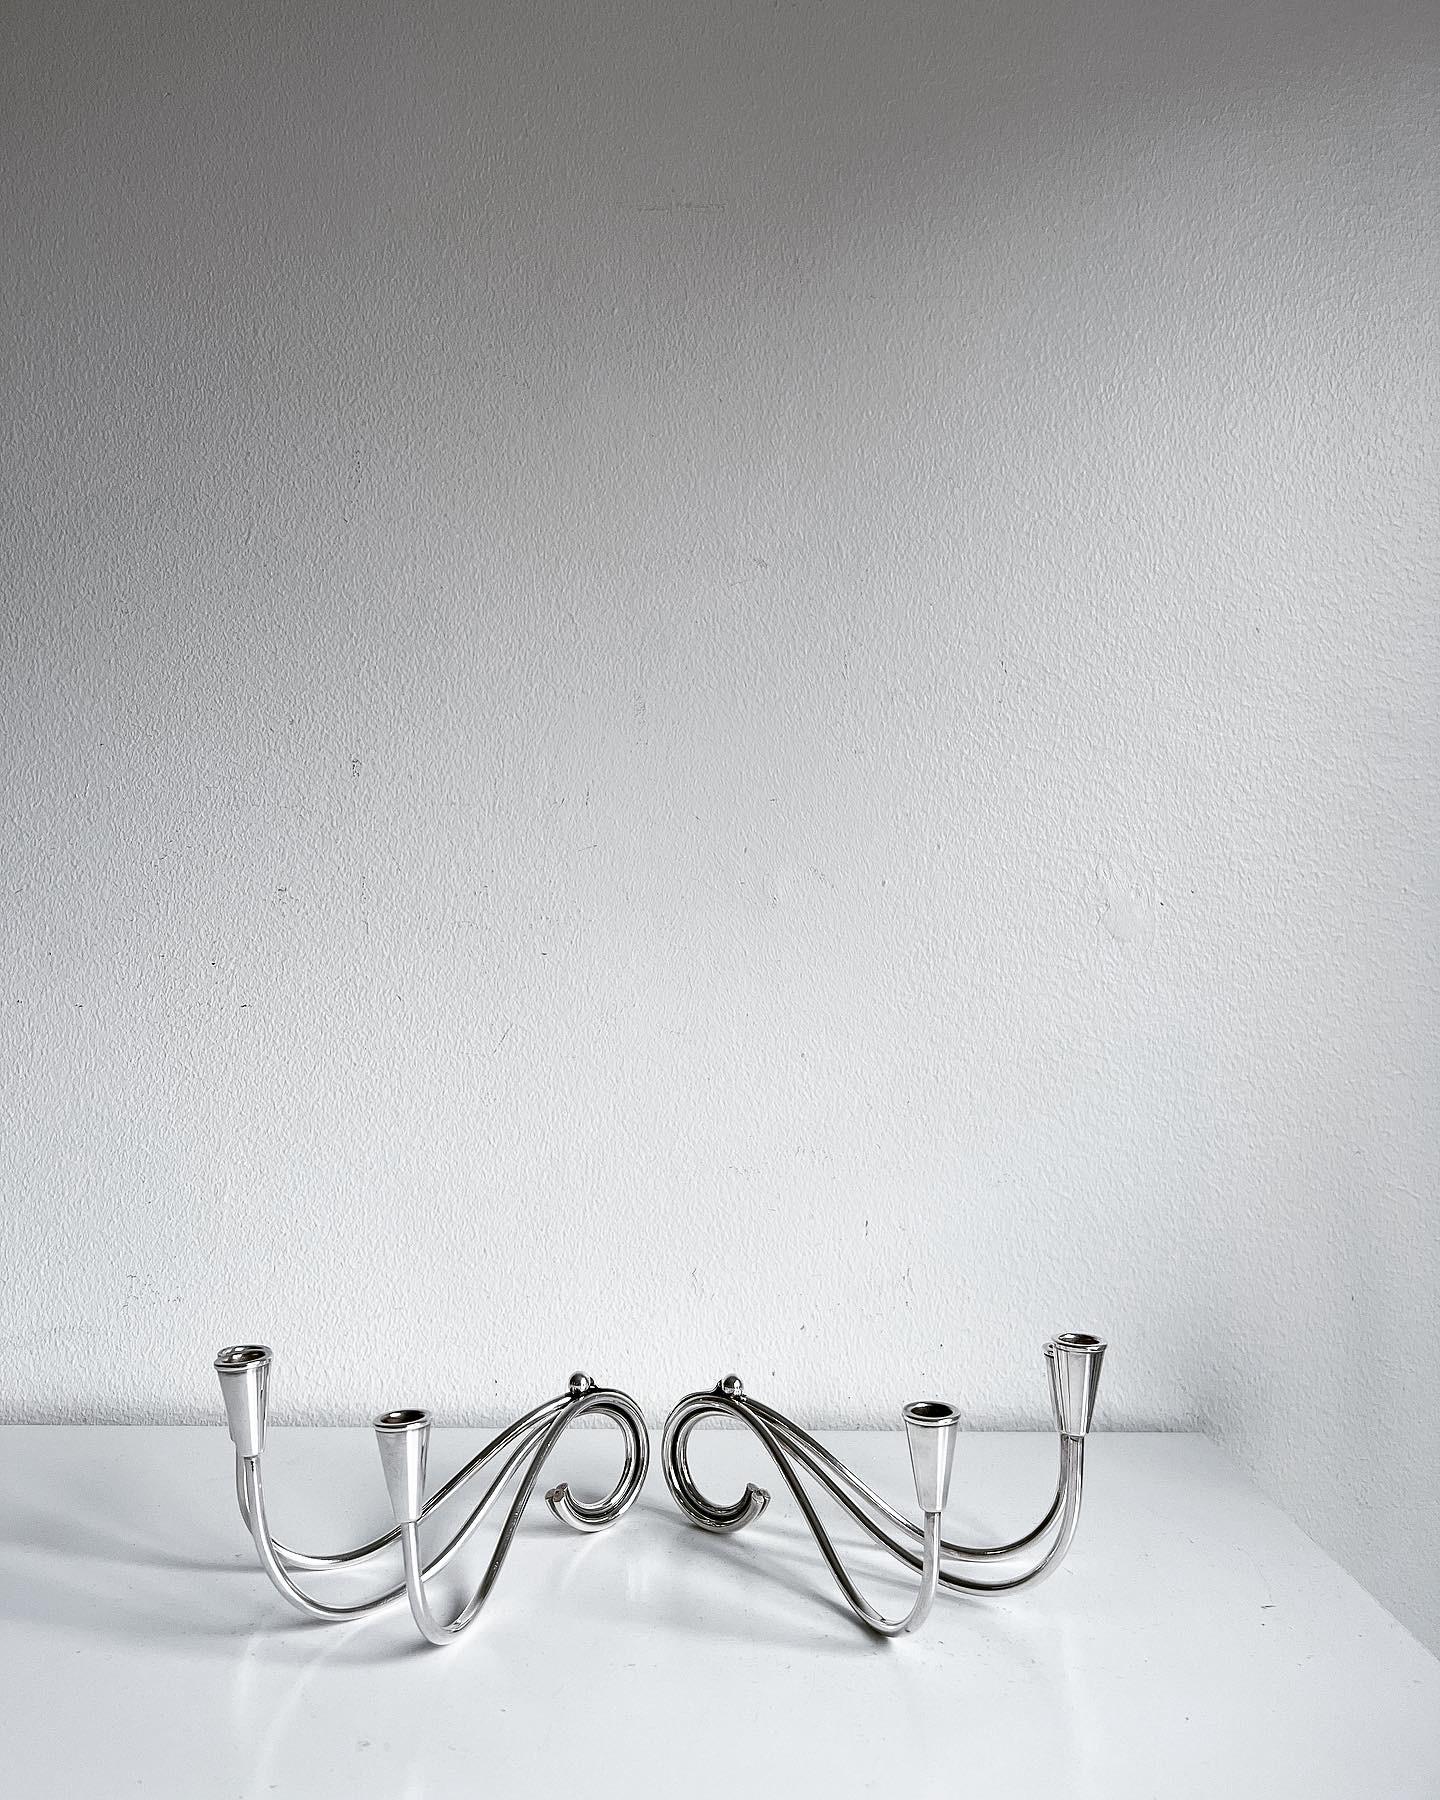 A beautiful pair of Danish Mid-Century Modern silver plated three-arm candleholders by designer Carl Frederik Christiansen, ca 1960-70s, Denmark. Both are marked with designers' initials 